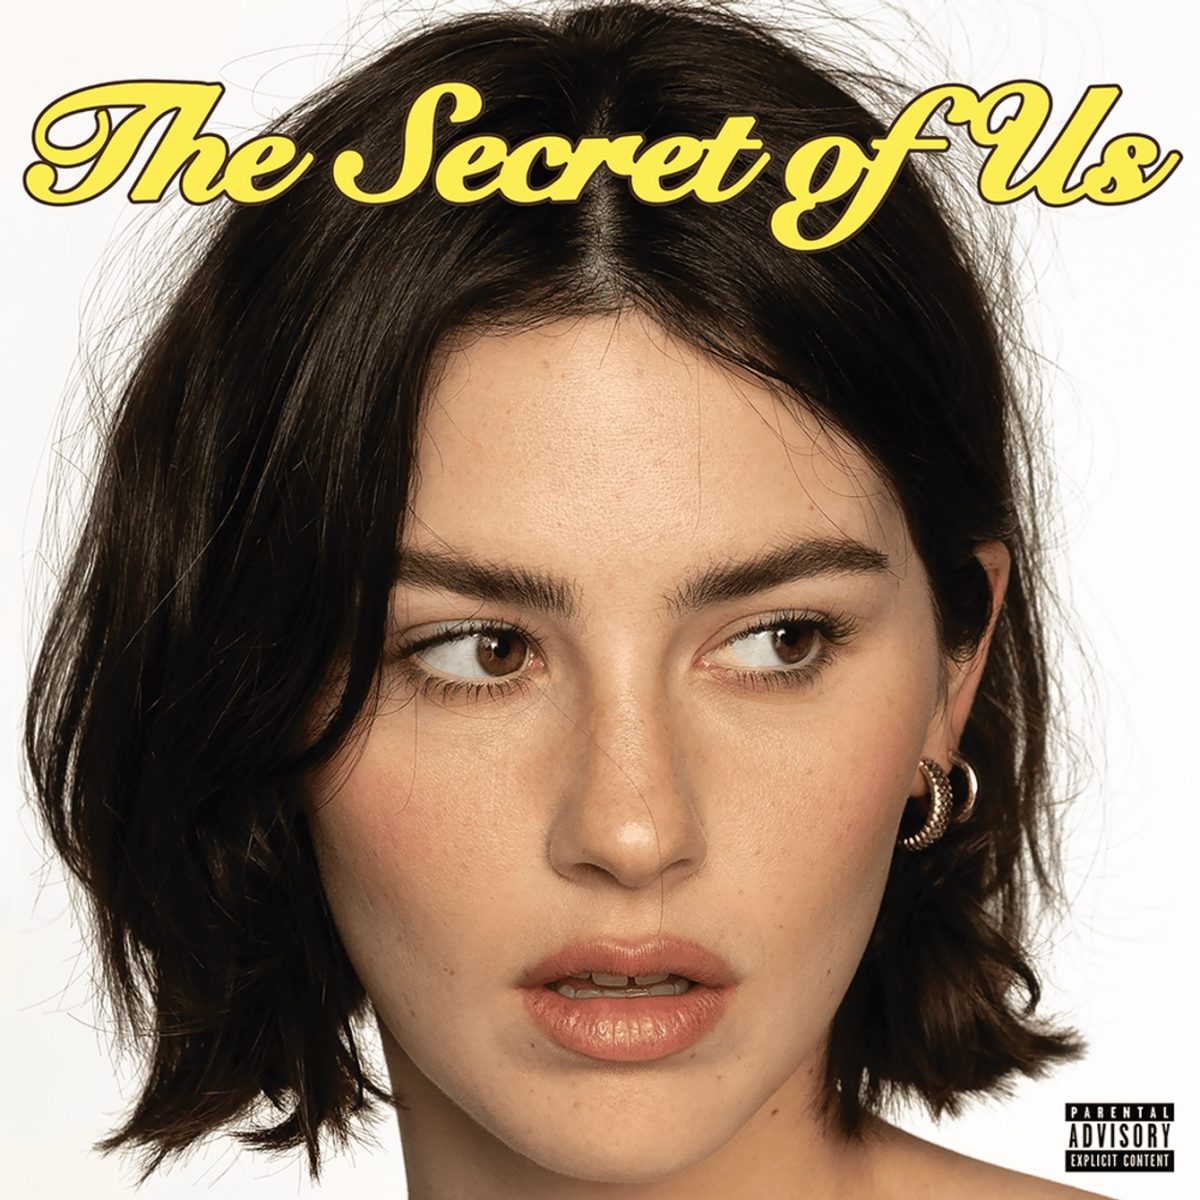 Cover of Gracie Abrams new album cover The Secret of Us announced to release June 21.